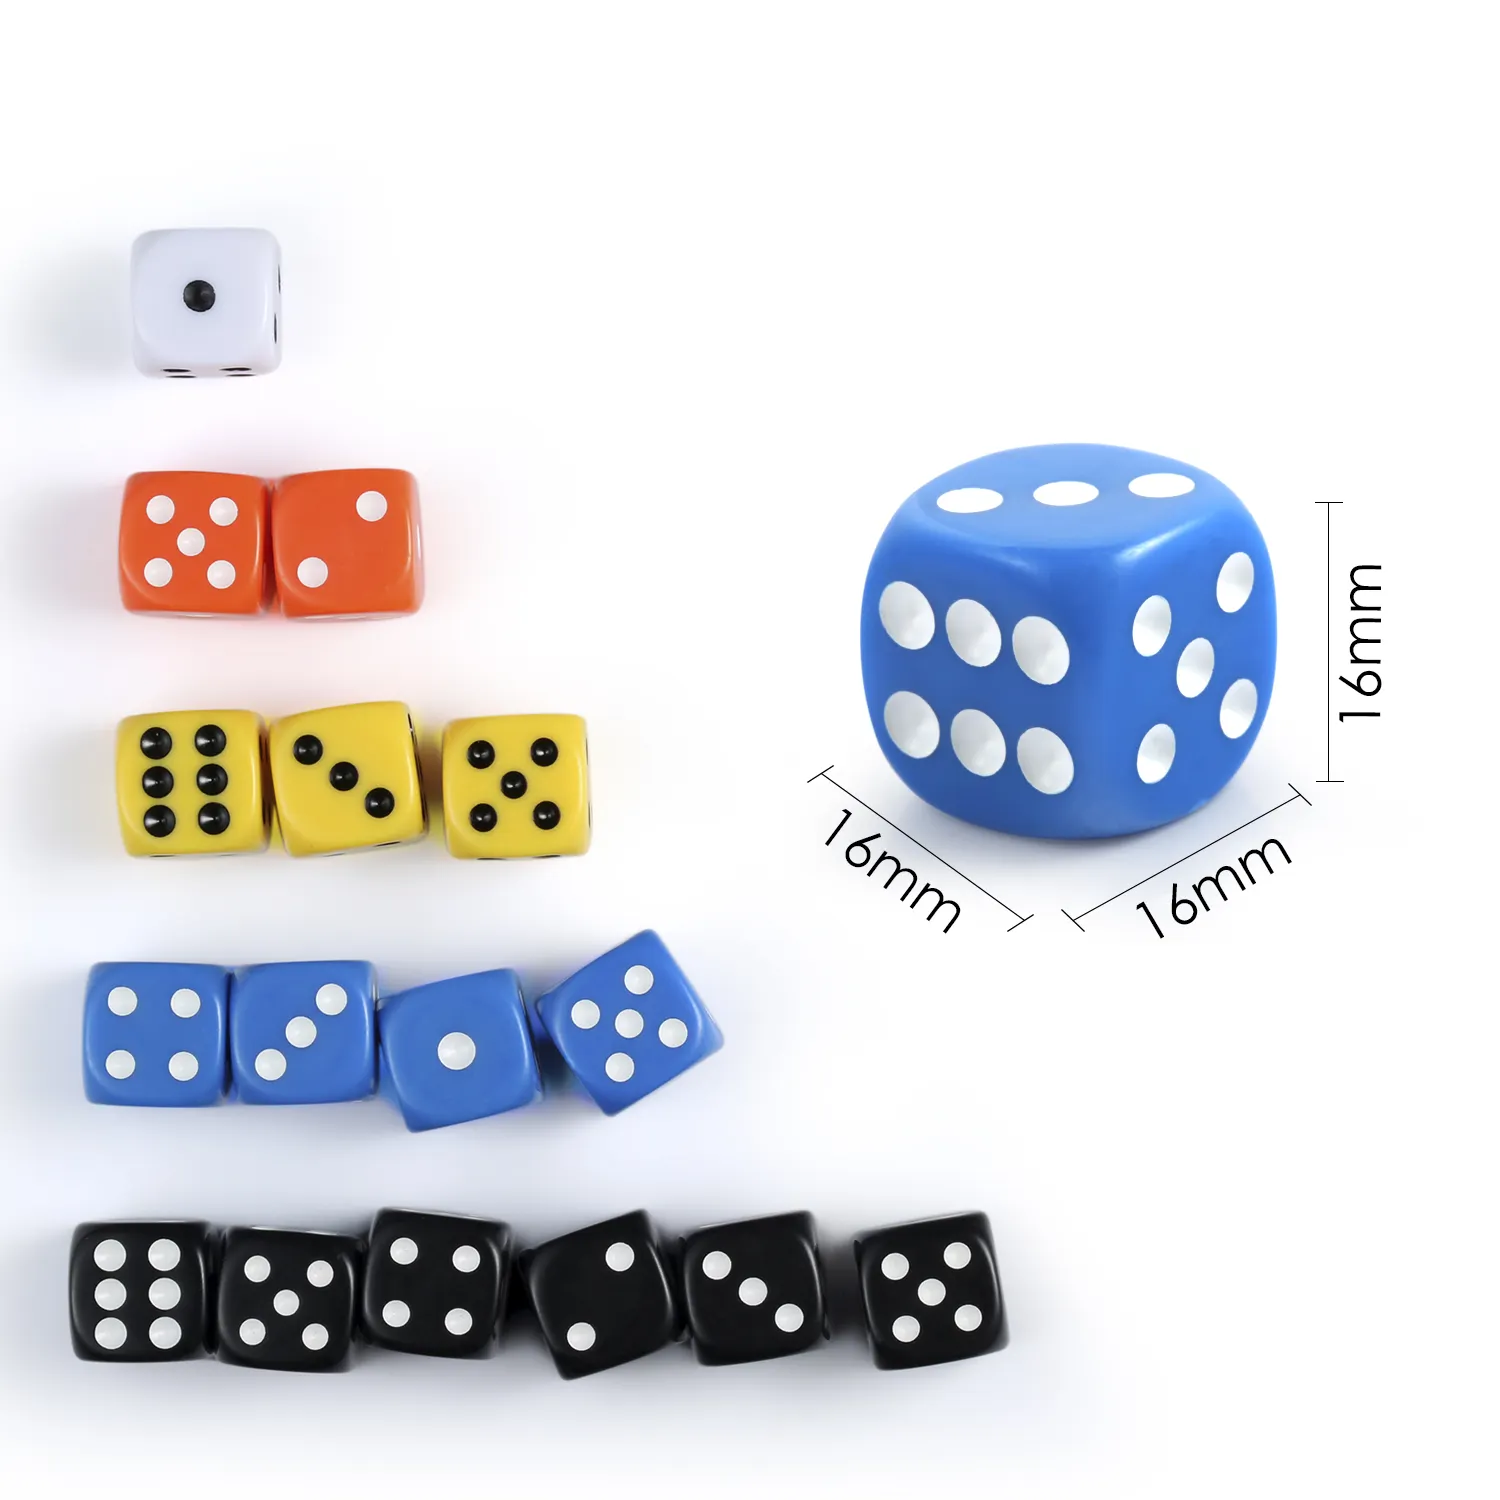 100 PCS 16mm 6-Sided Rounded Corner Dice Set Standard Size D6 Game Dice in 10 Different Solid Colors Case for Playing Games Dice